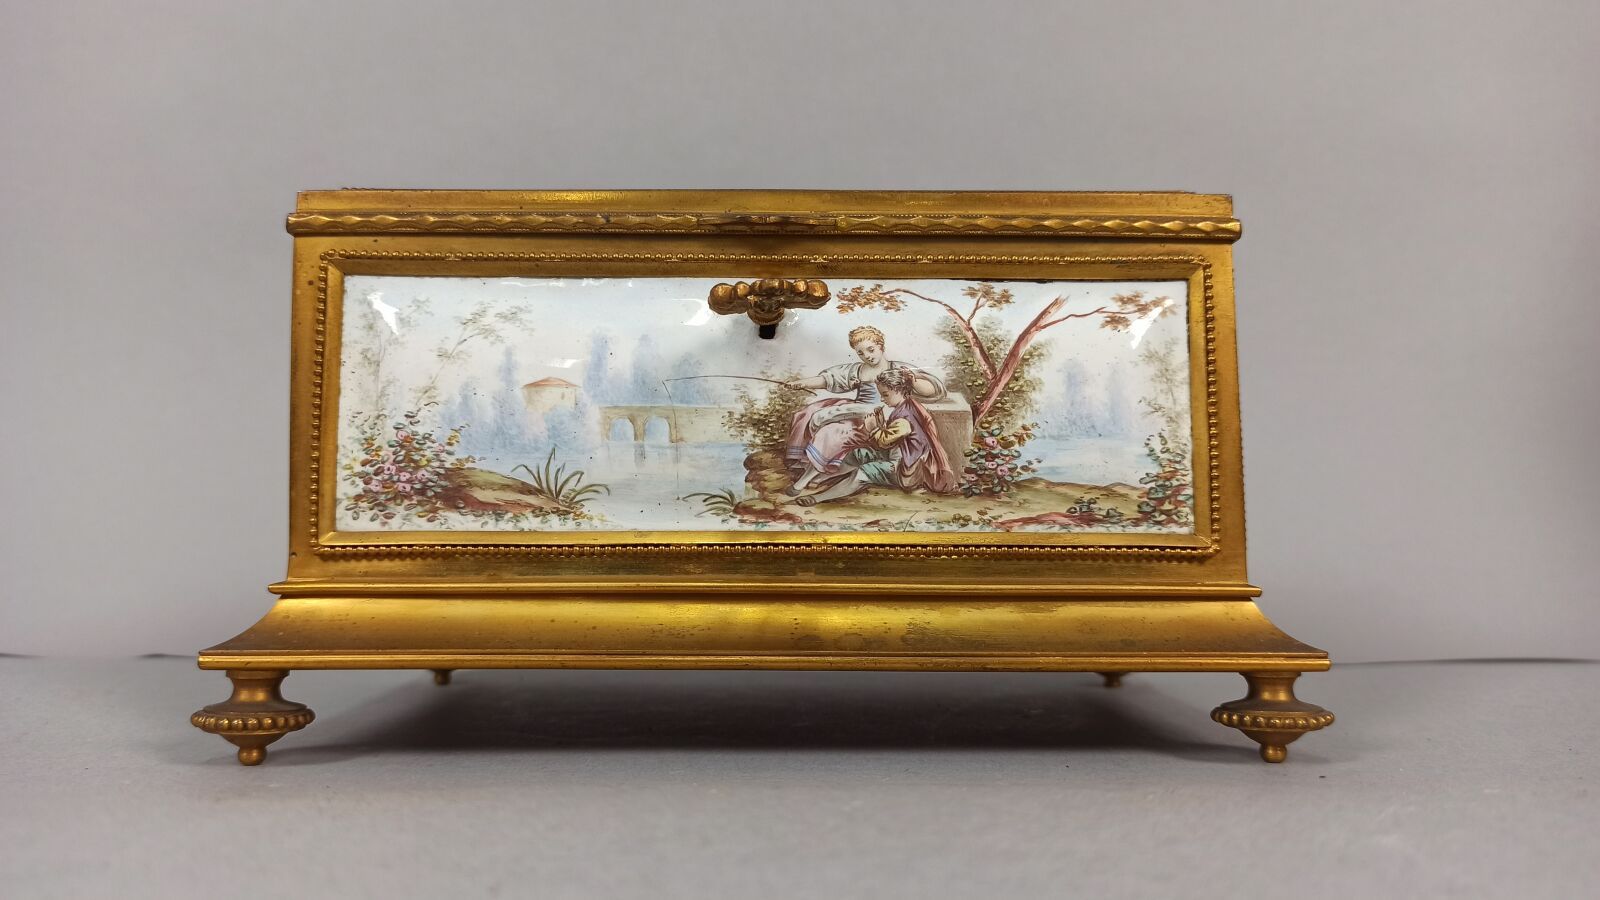 Null Enamelled box around 1900 with polychrome decoration of a galant scene

Hei&hellip;